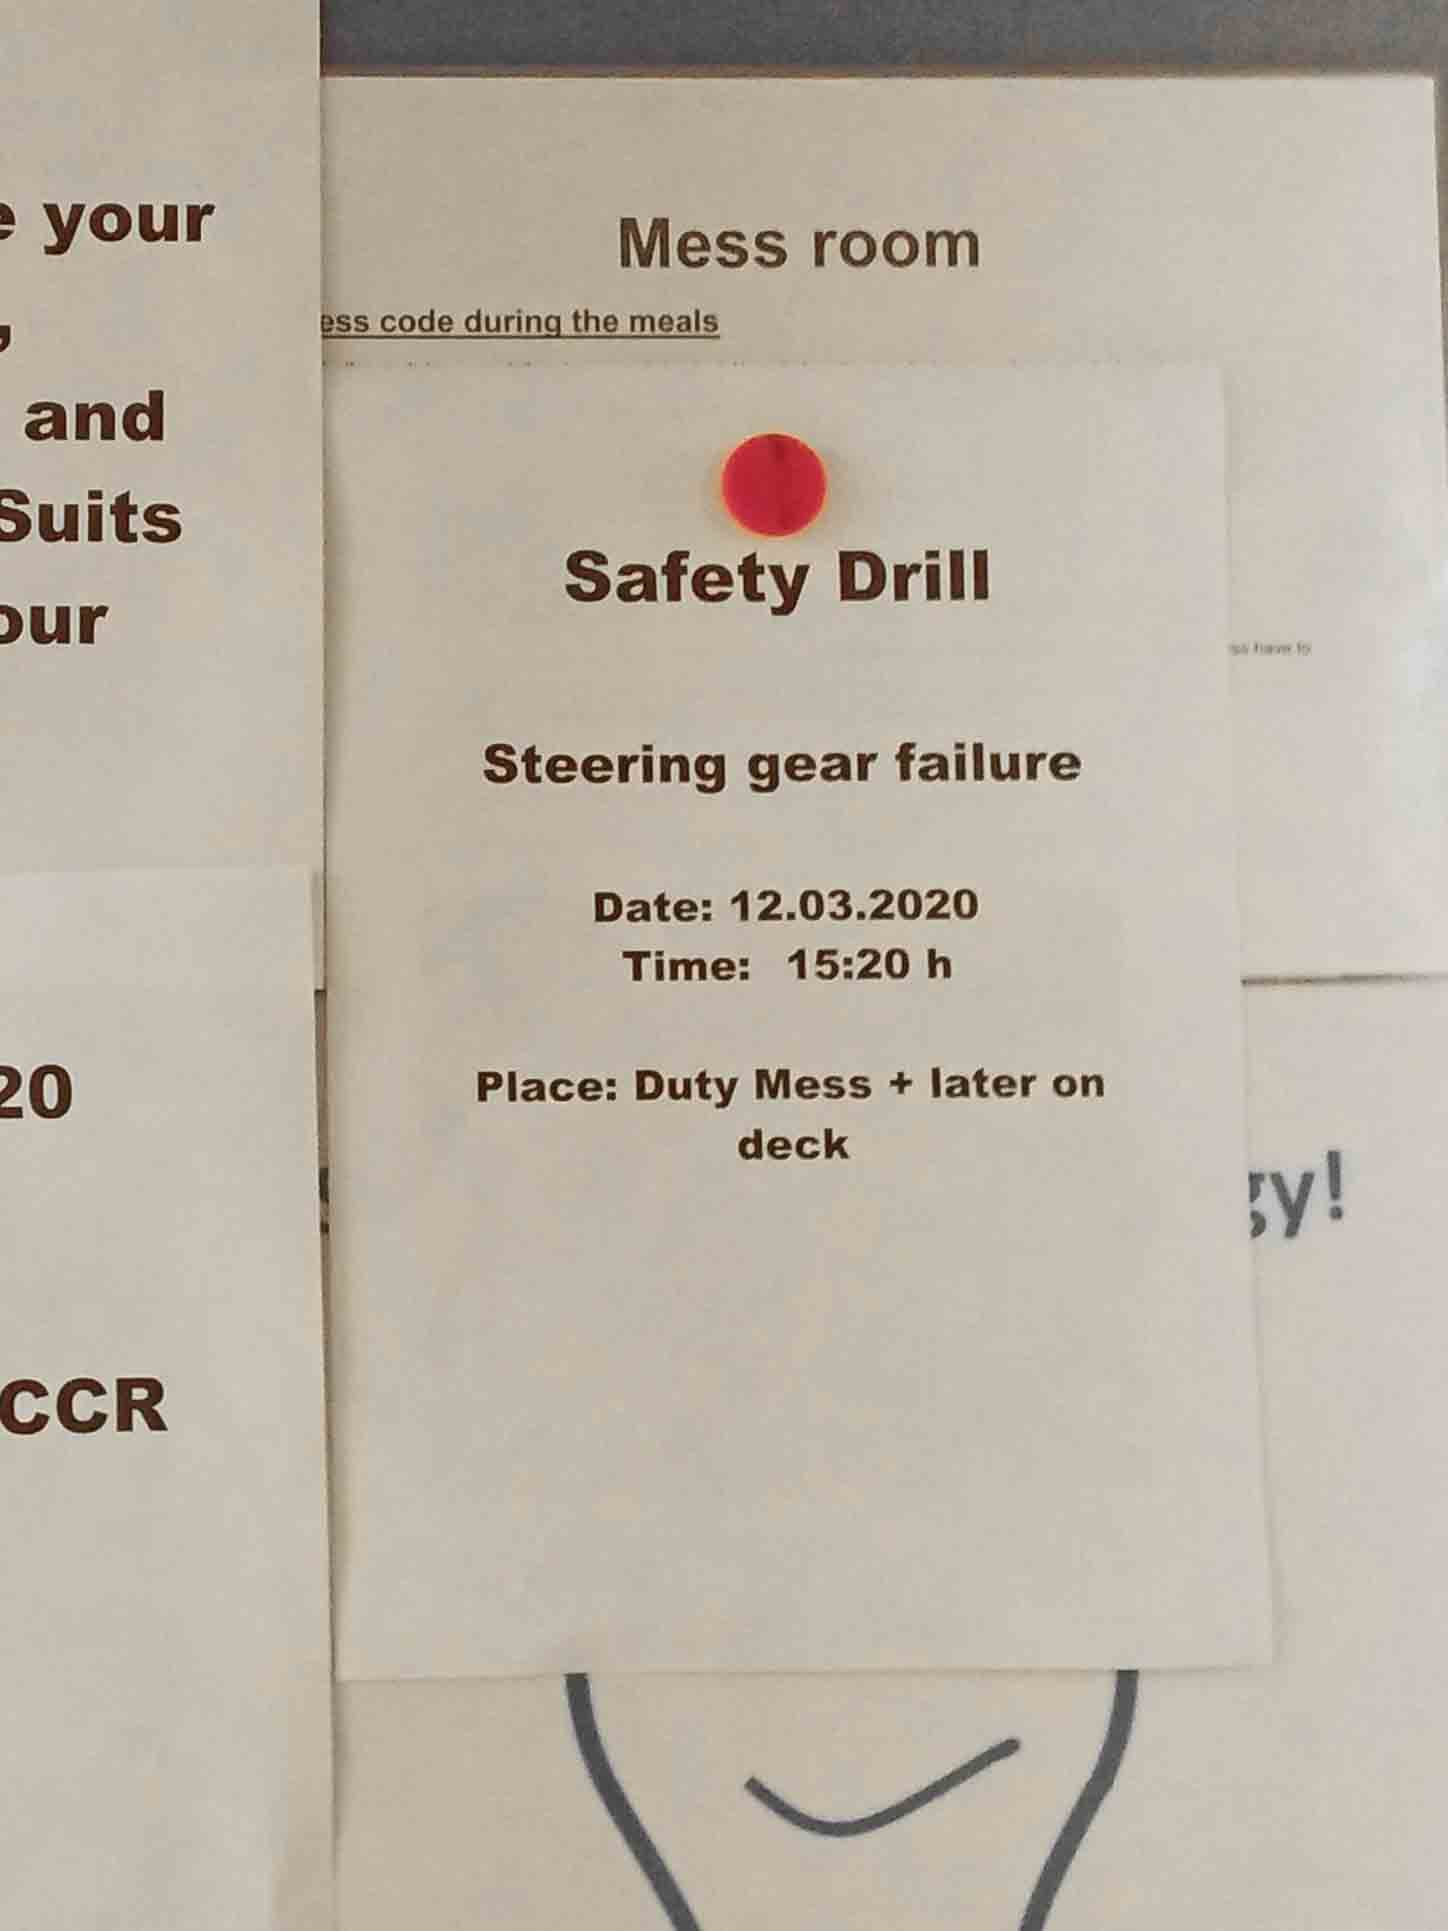 A drill schedule for steering gear failure posted on the door of the mess room.